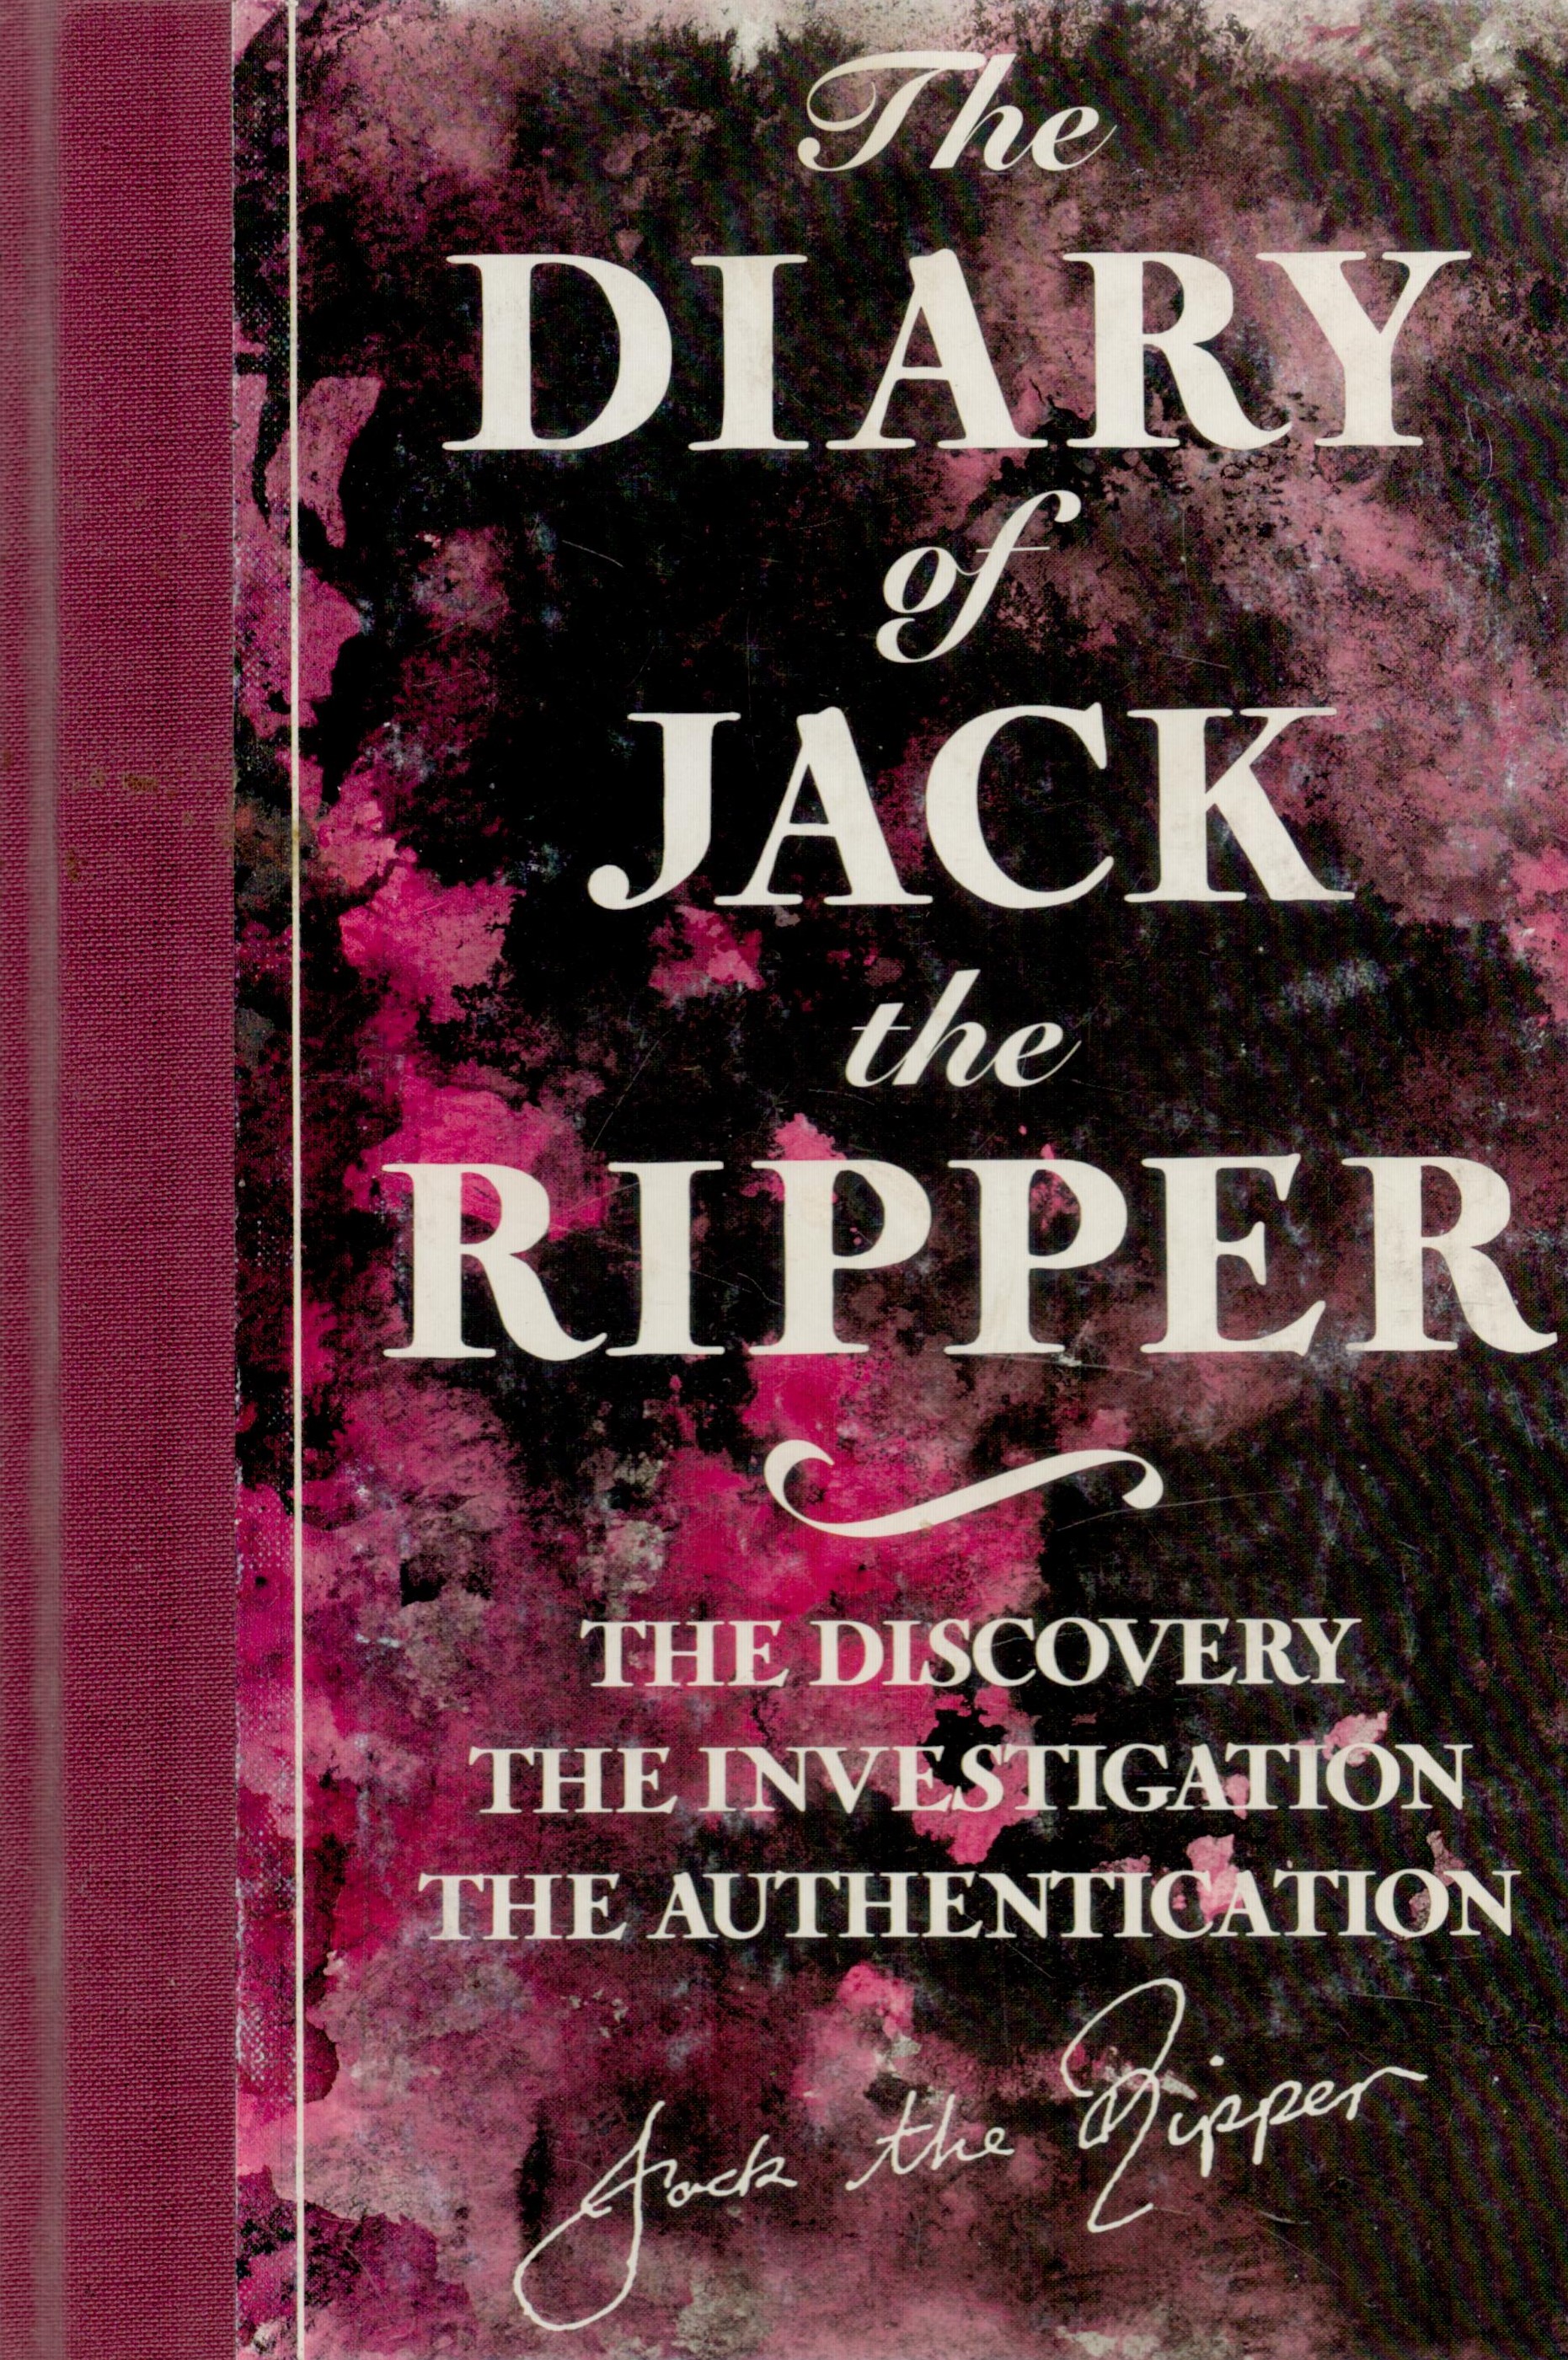 The Diary of Jack The Ripper - The Discovery, The Investigation, The Authentication narrative by